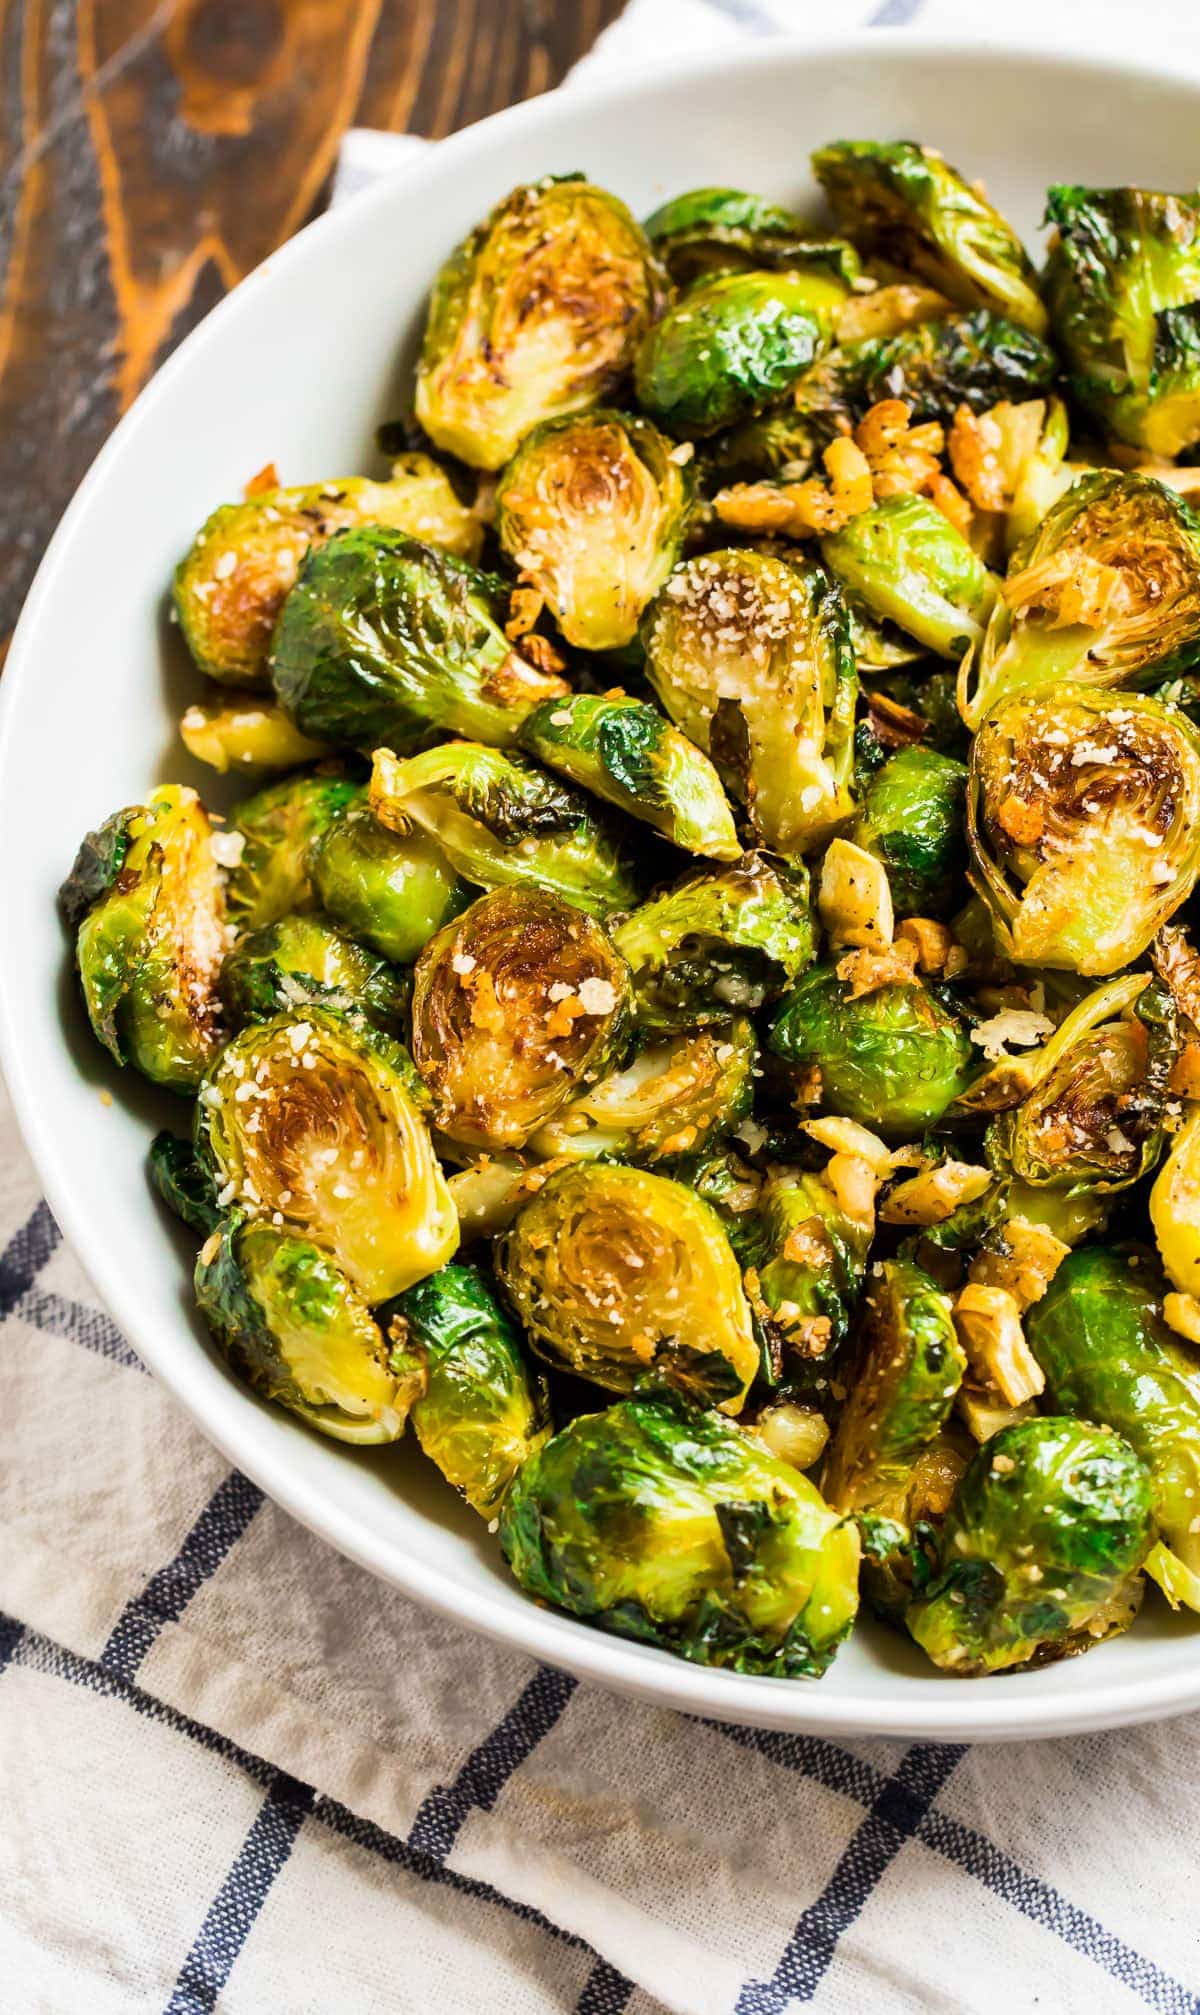 ROASTED BRUSSELS SPROUTS (A LA CARTE)